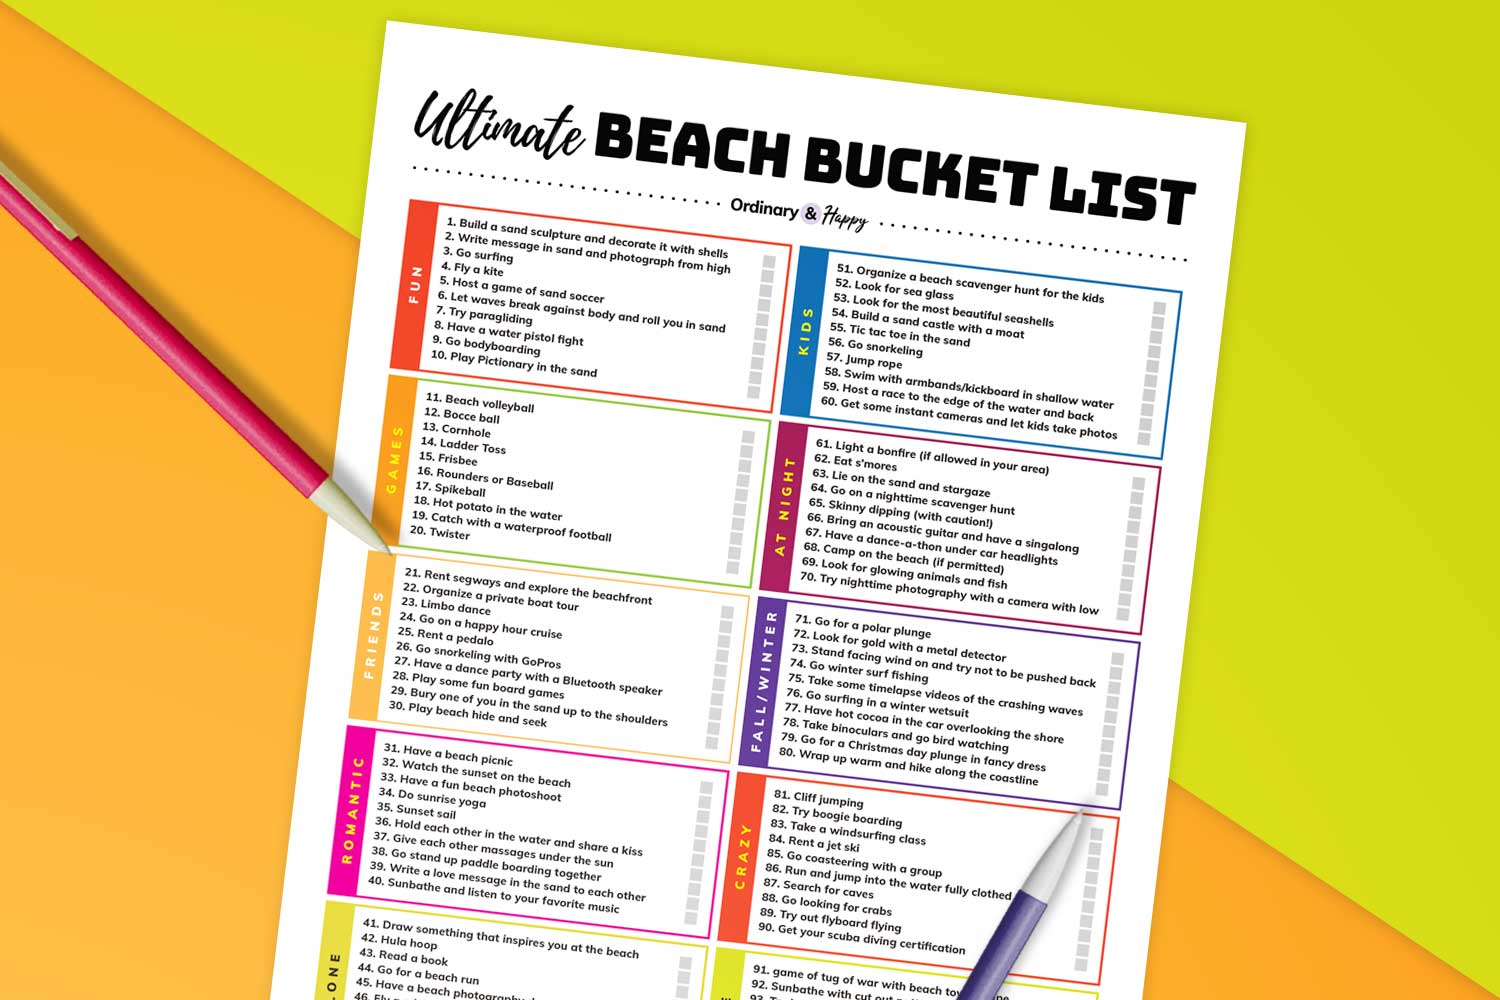 100+ Things to Do at the Beach (Bucket List)